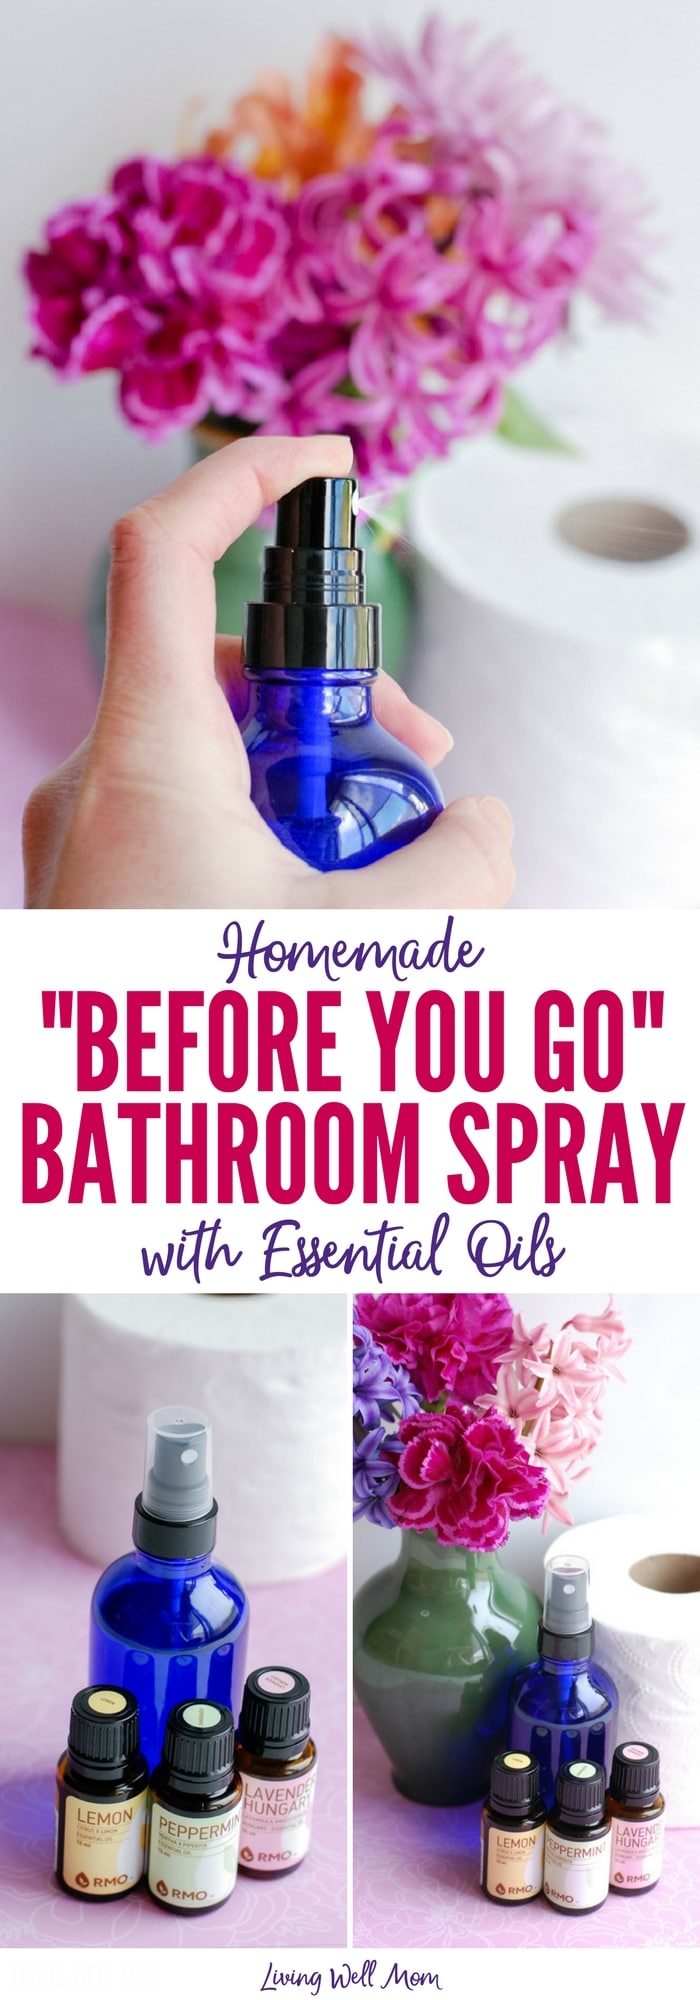 Homemade “Before-You-Go” spray - this 3-ingredient spray uses essential oils to naturally deodorize your bathroom before and after you “go”!